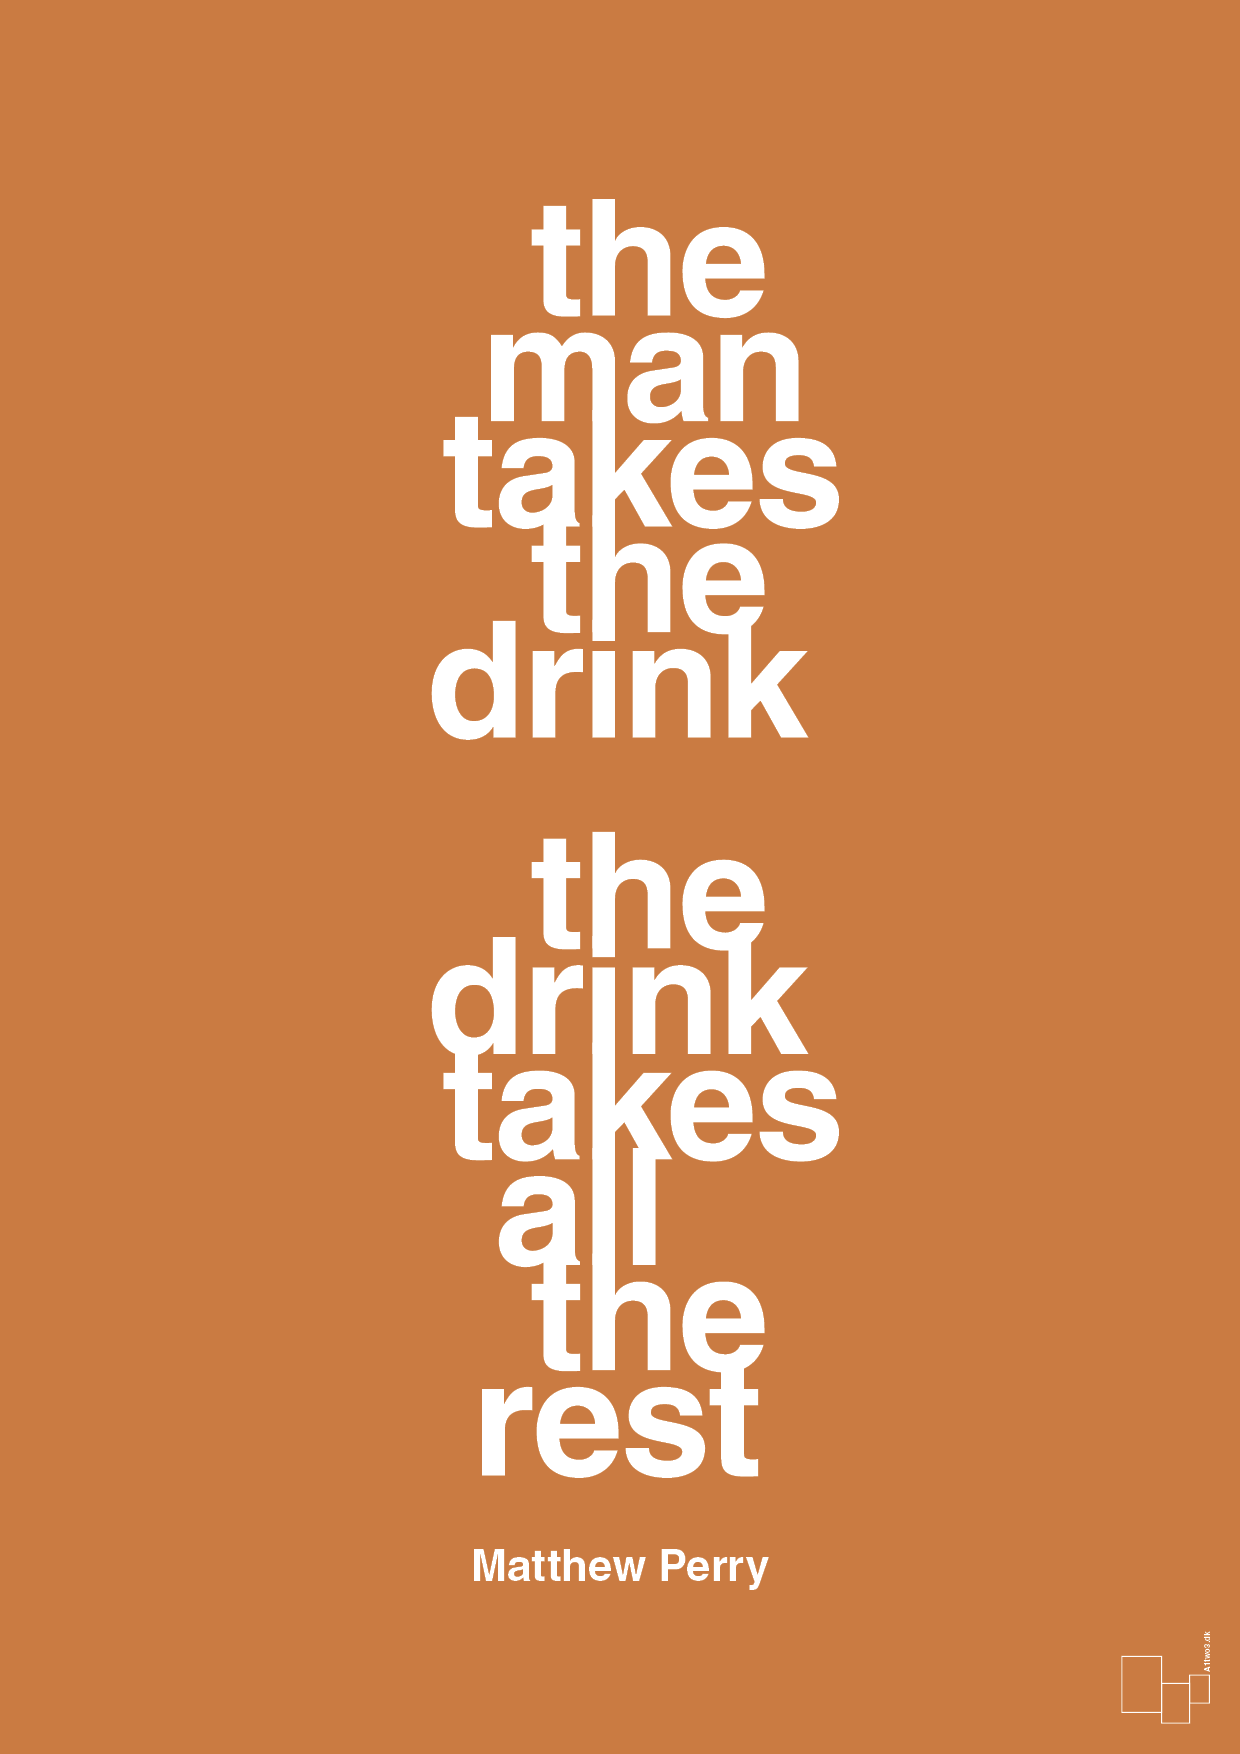 the man takes the drink the drink takes all the rest - Plakat med Citater i Rumba Orange